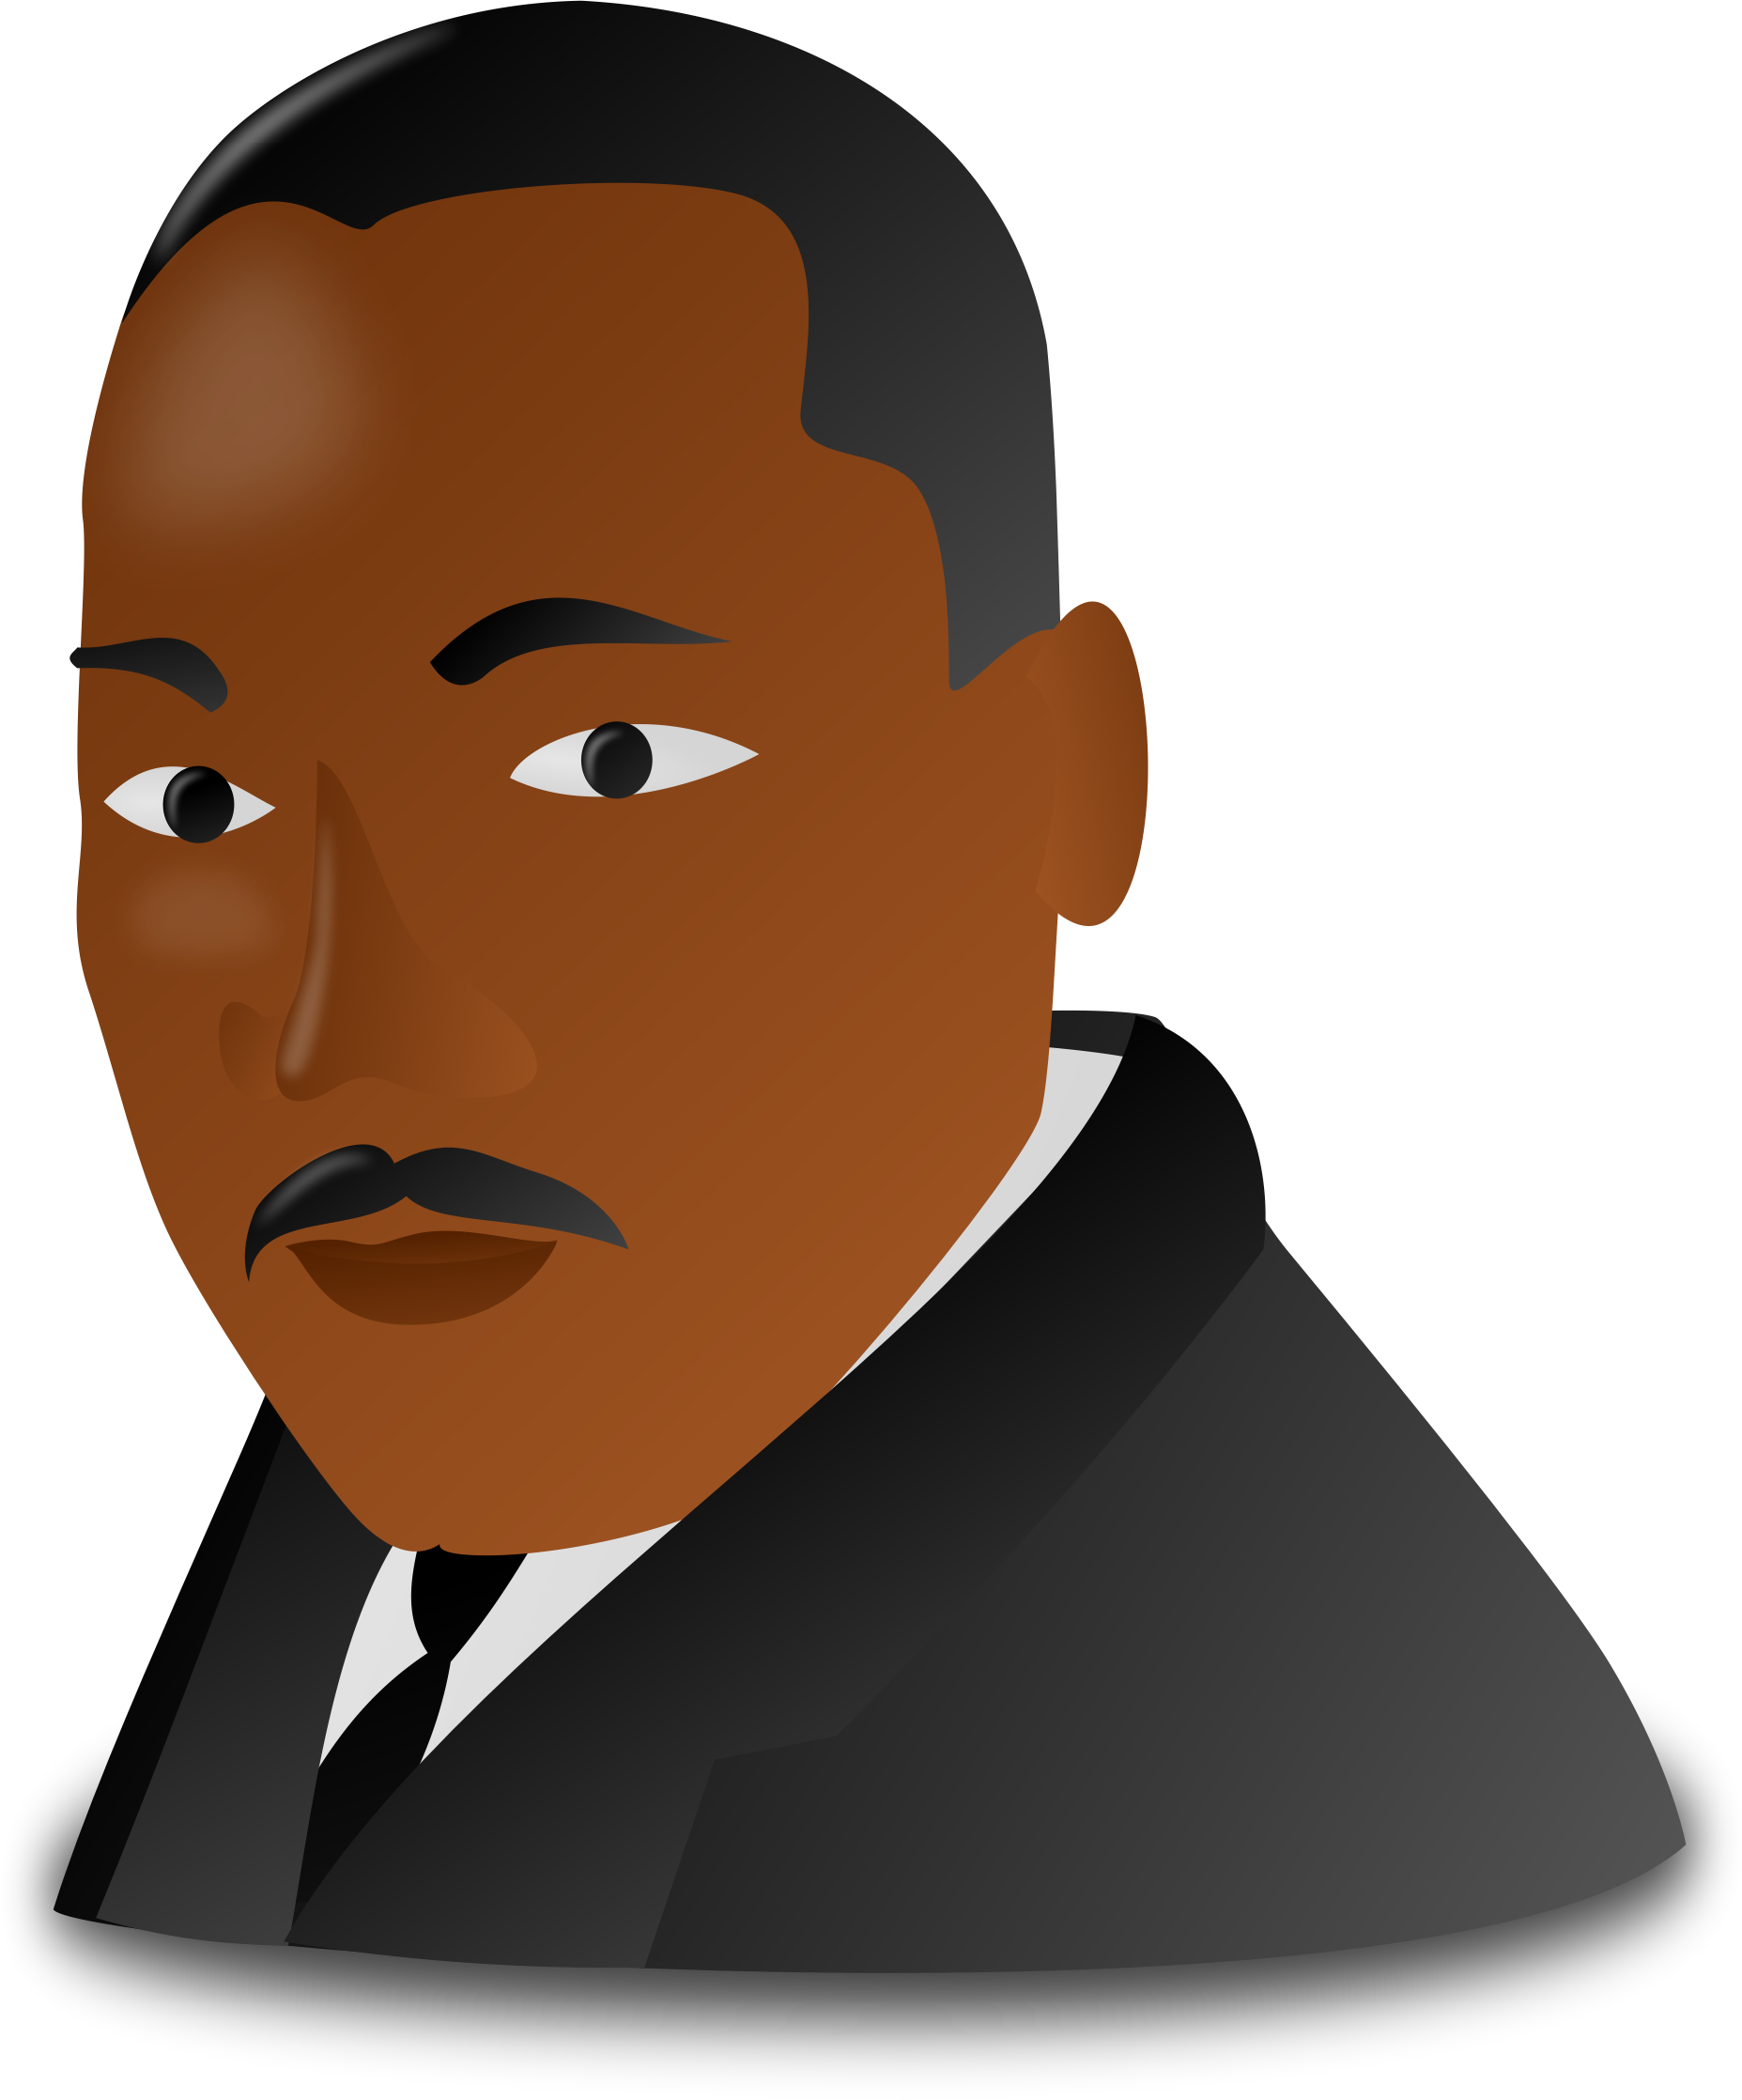 Images For Martin Luther King Jr Day Clip Art - Martin Luther King Jr Clipart - HD Wallpaper 